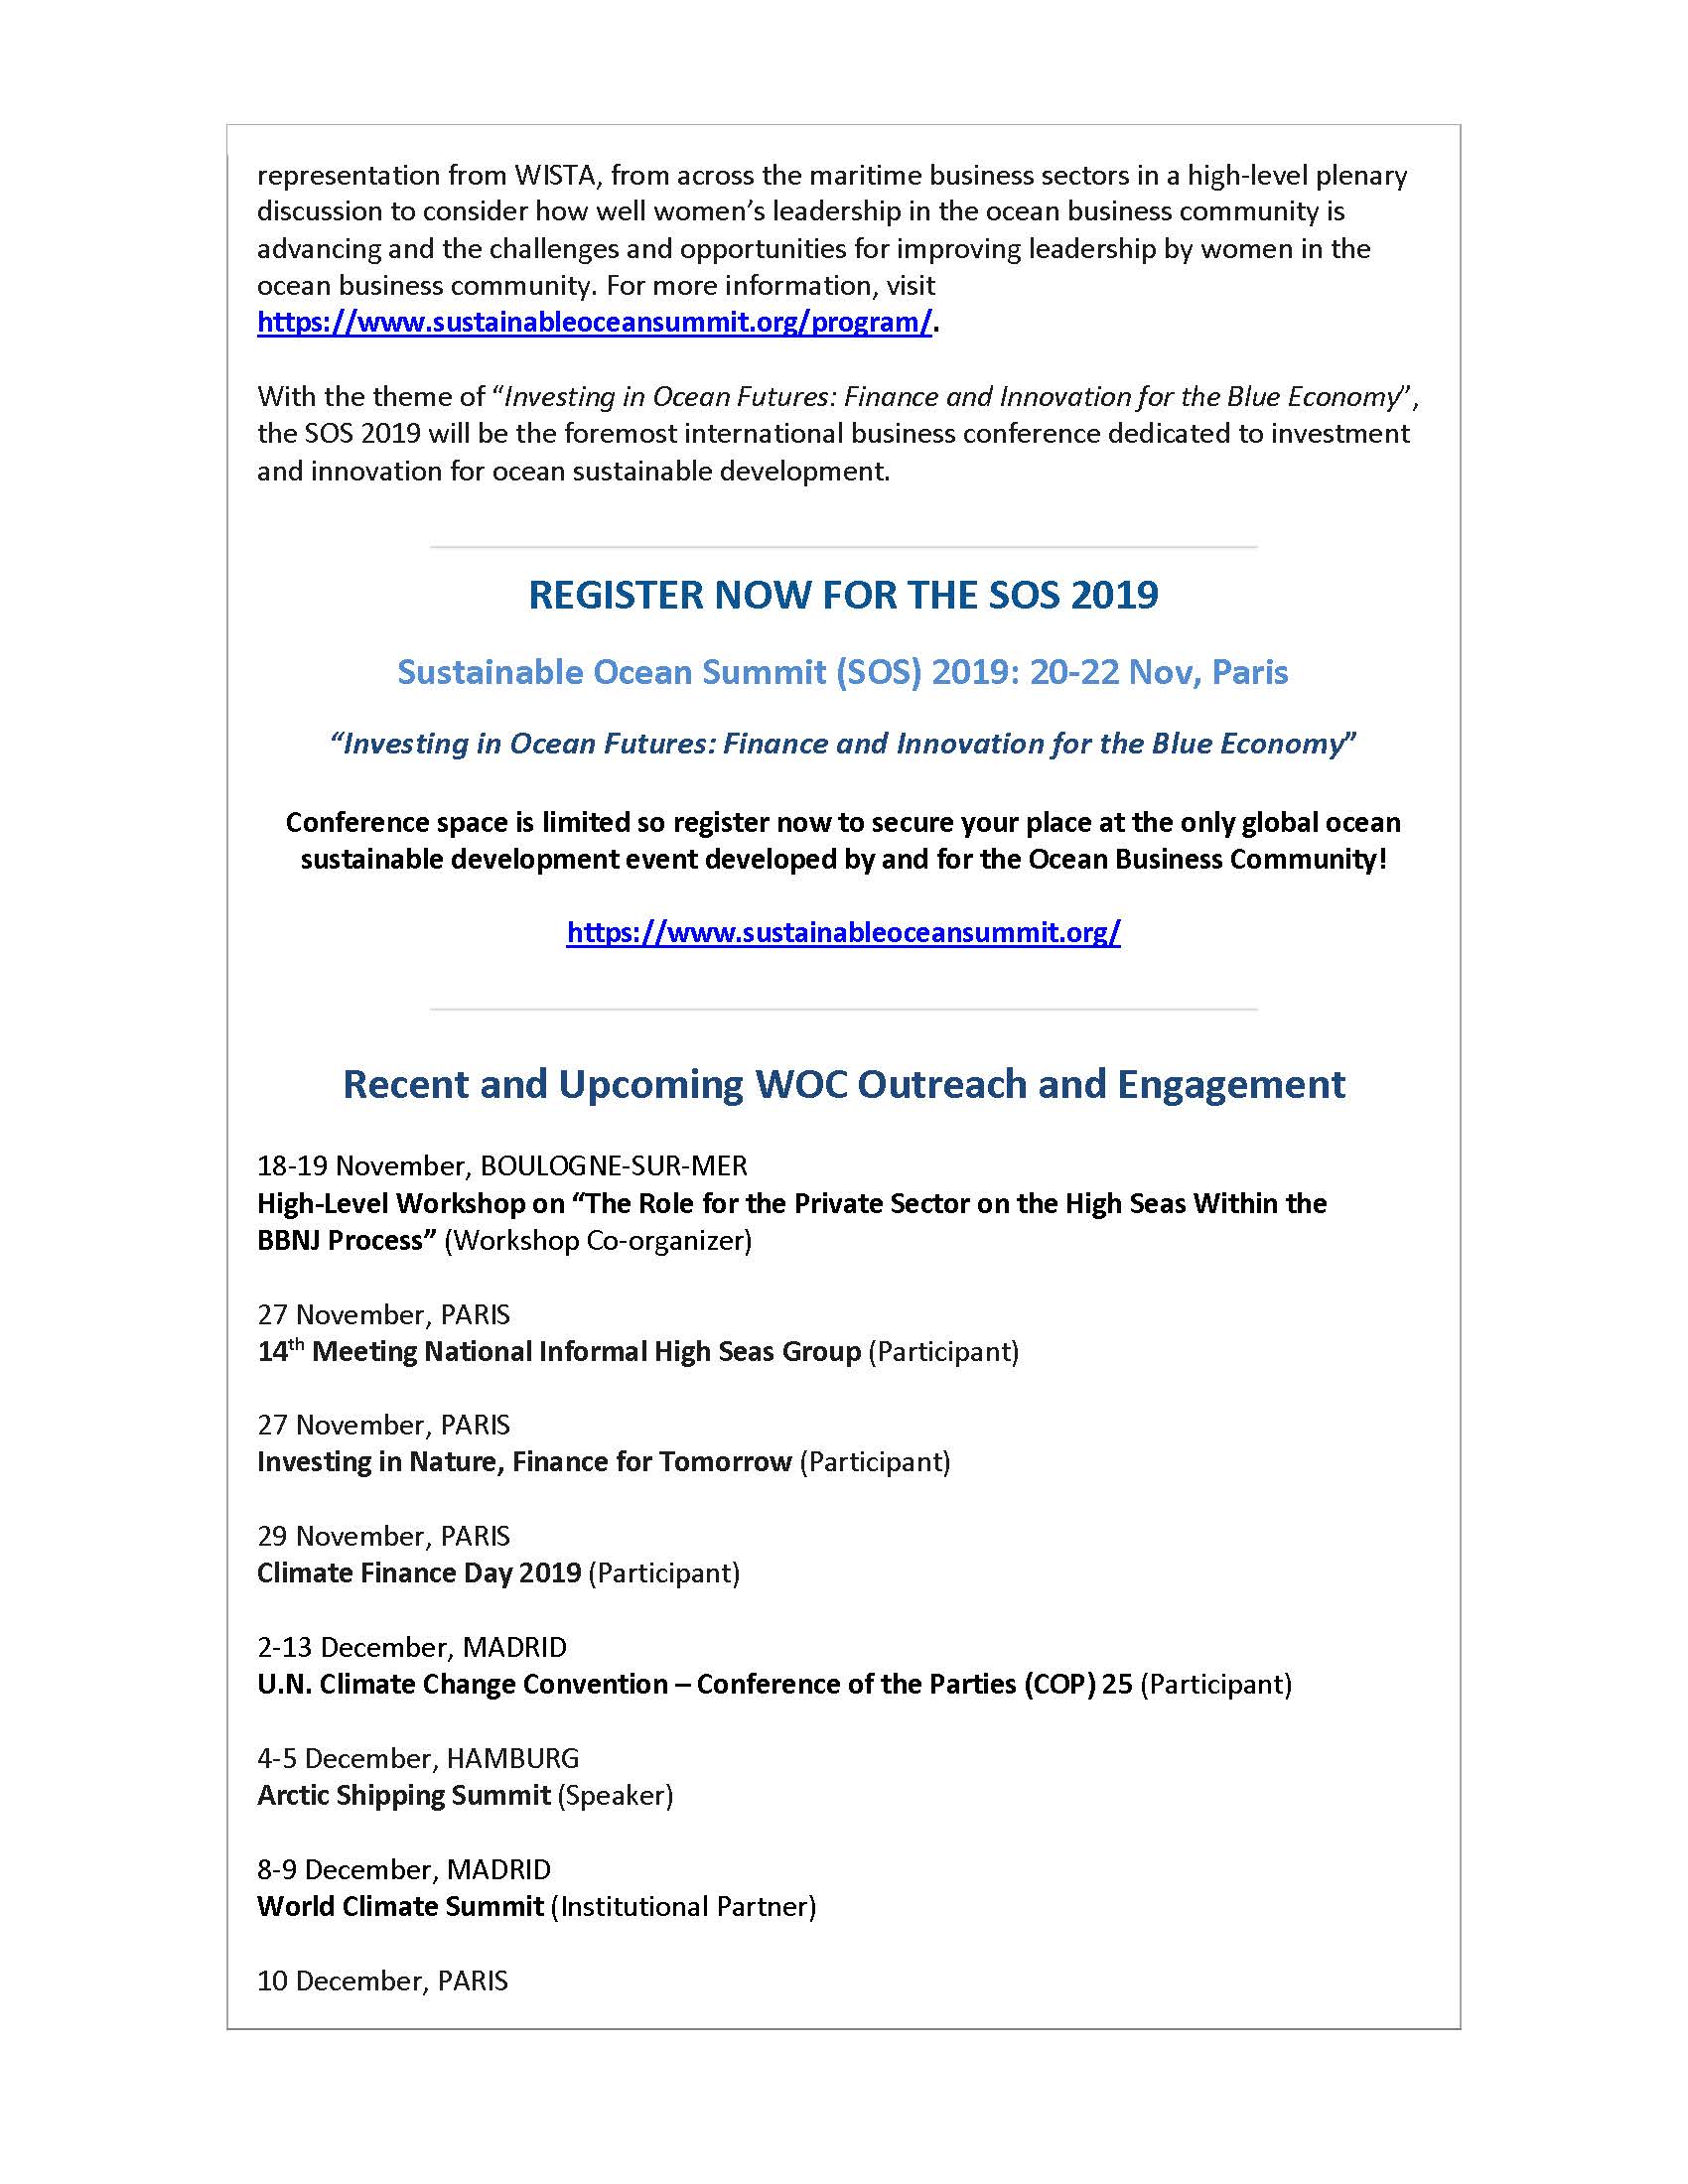 WOC and WISTA to Sign MOU at Sustainable Ocean Summit 2019 (Paris 20-22 Nov) - 18 November 2019